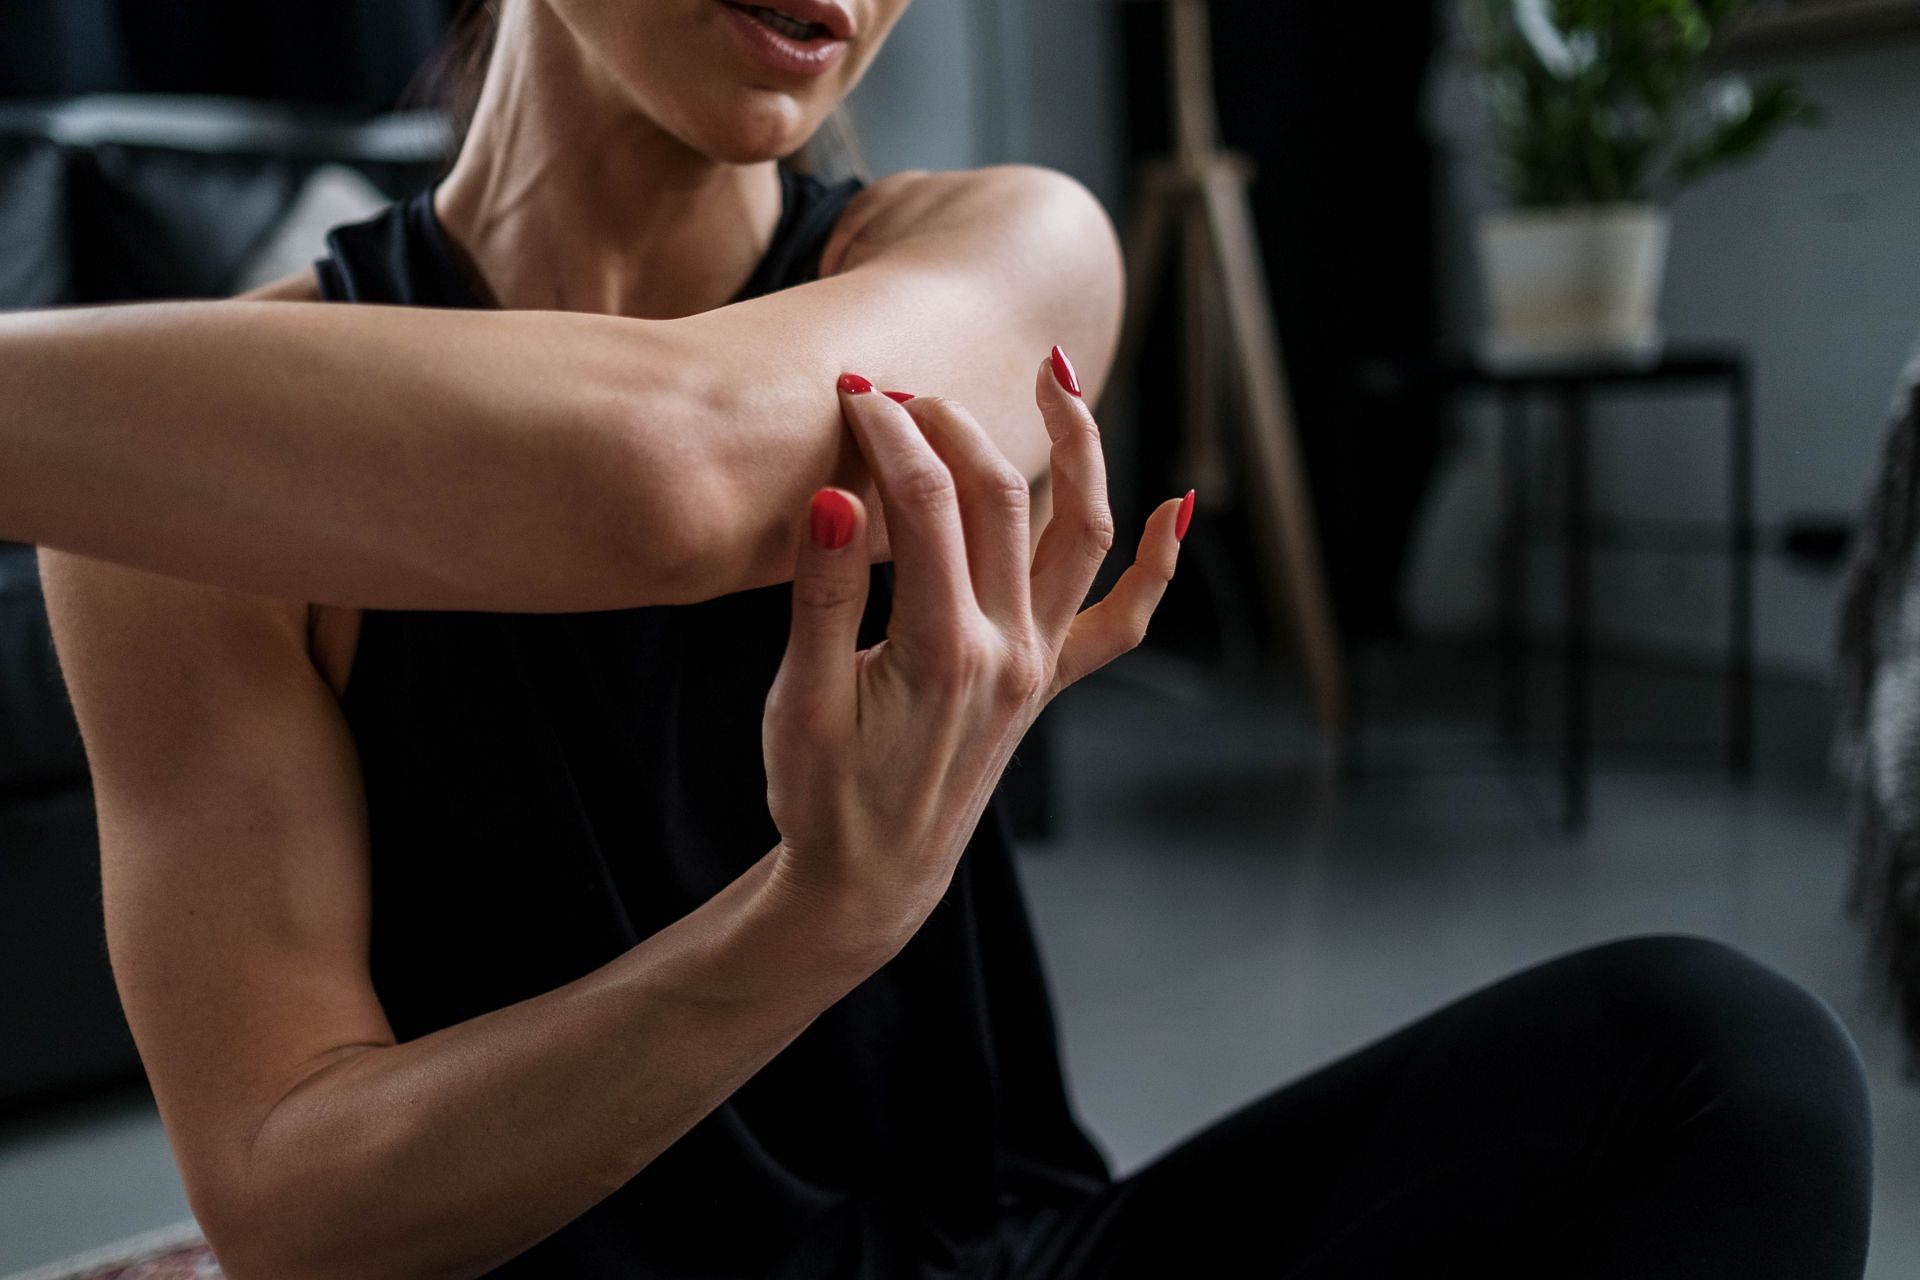 Toning the triceps can help you get rid of flabby arm fat. (Image via Pexels/Ron Lach)